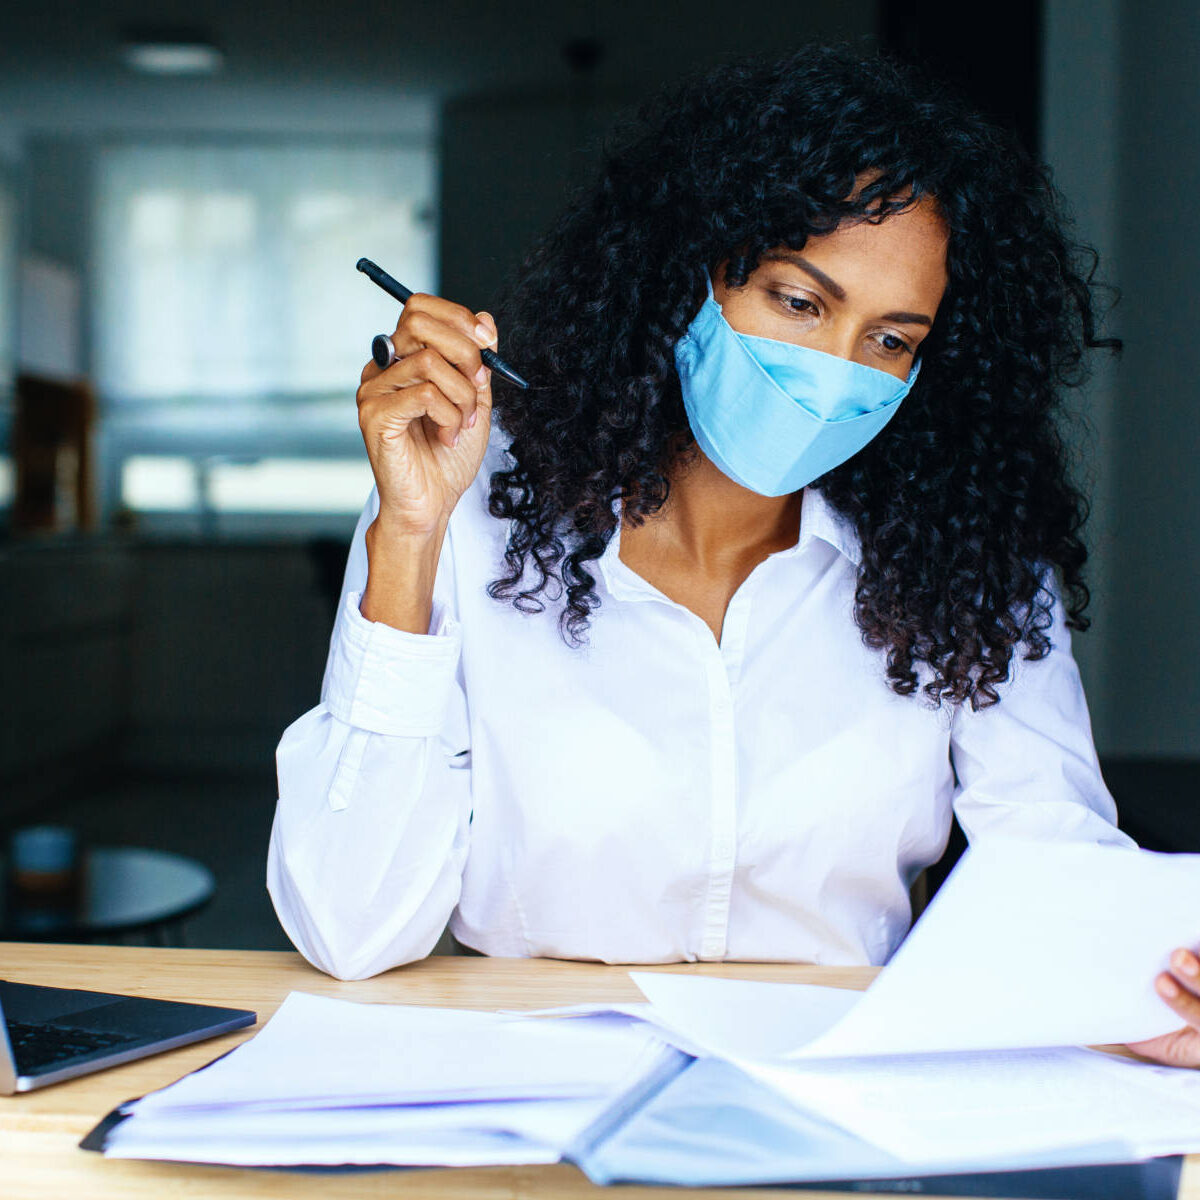 Portrait of a person working sitting at desk wearing mask, reading paper bill or contract